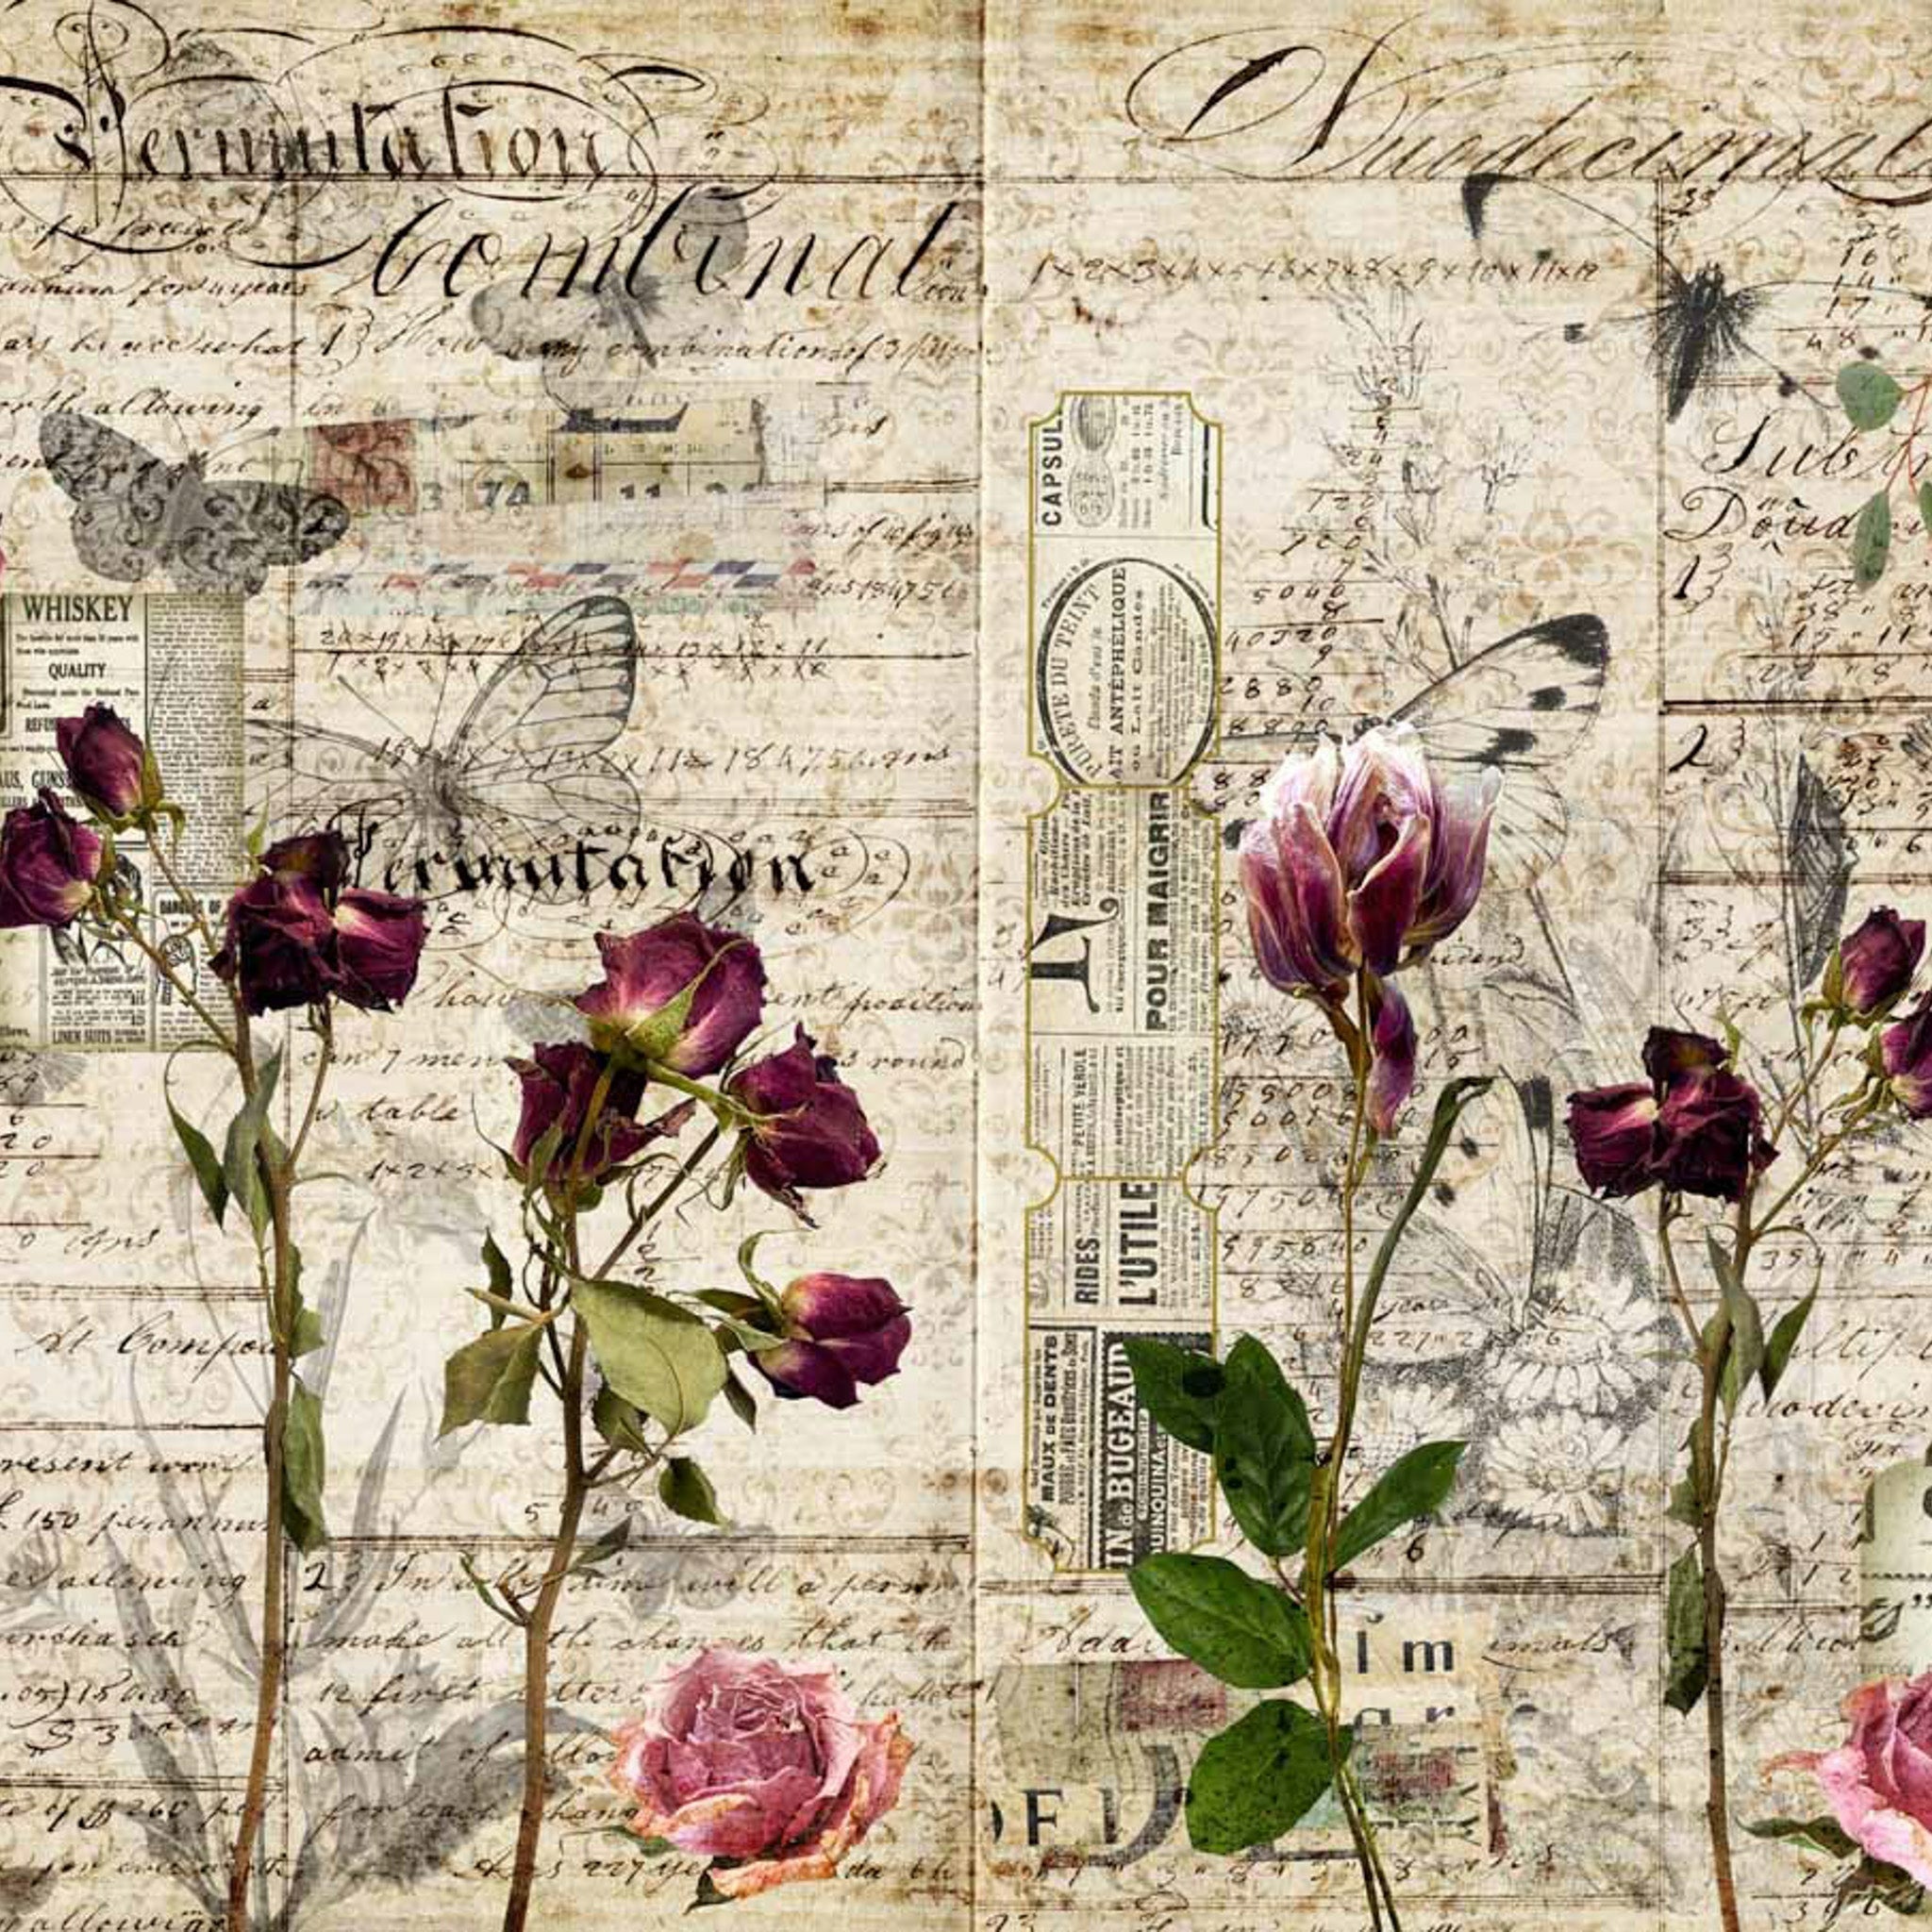 A4 rice paper design of pressed flowers against a collage of vintage magazine clippings and letters.